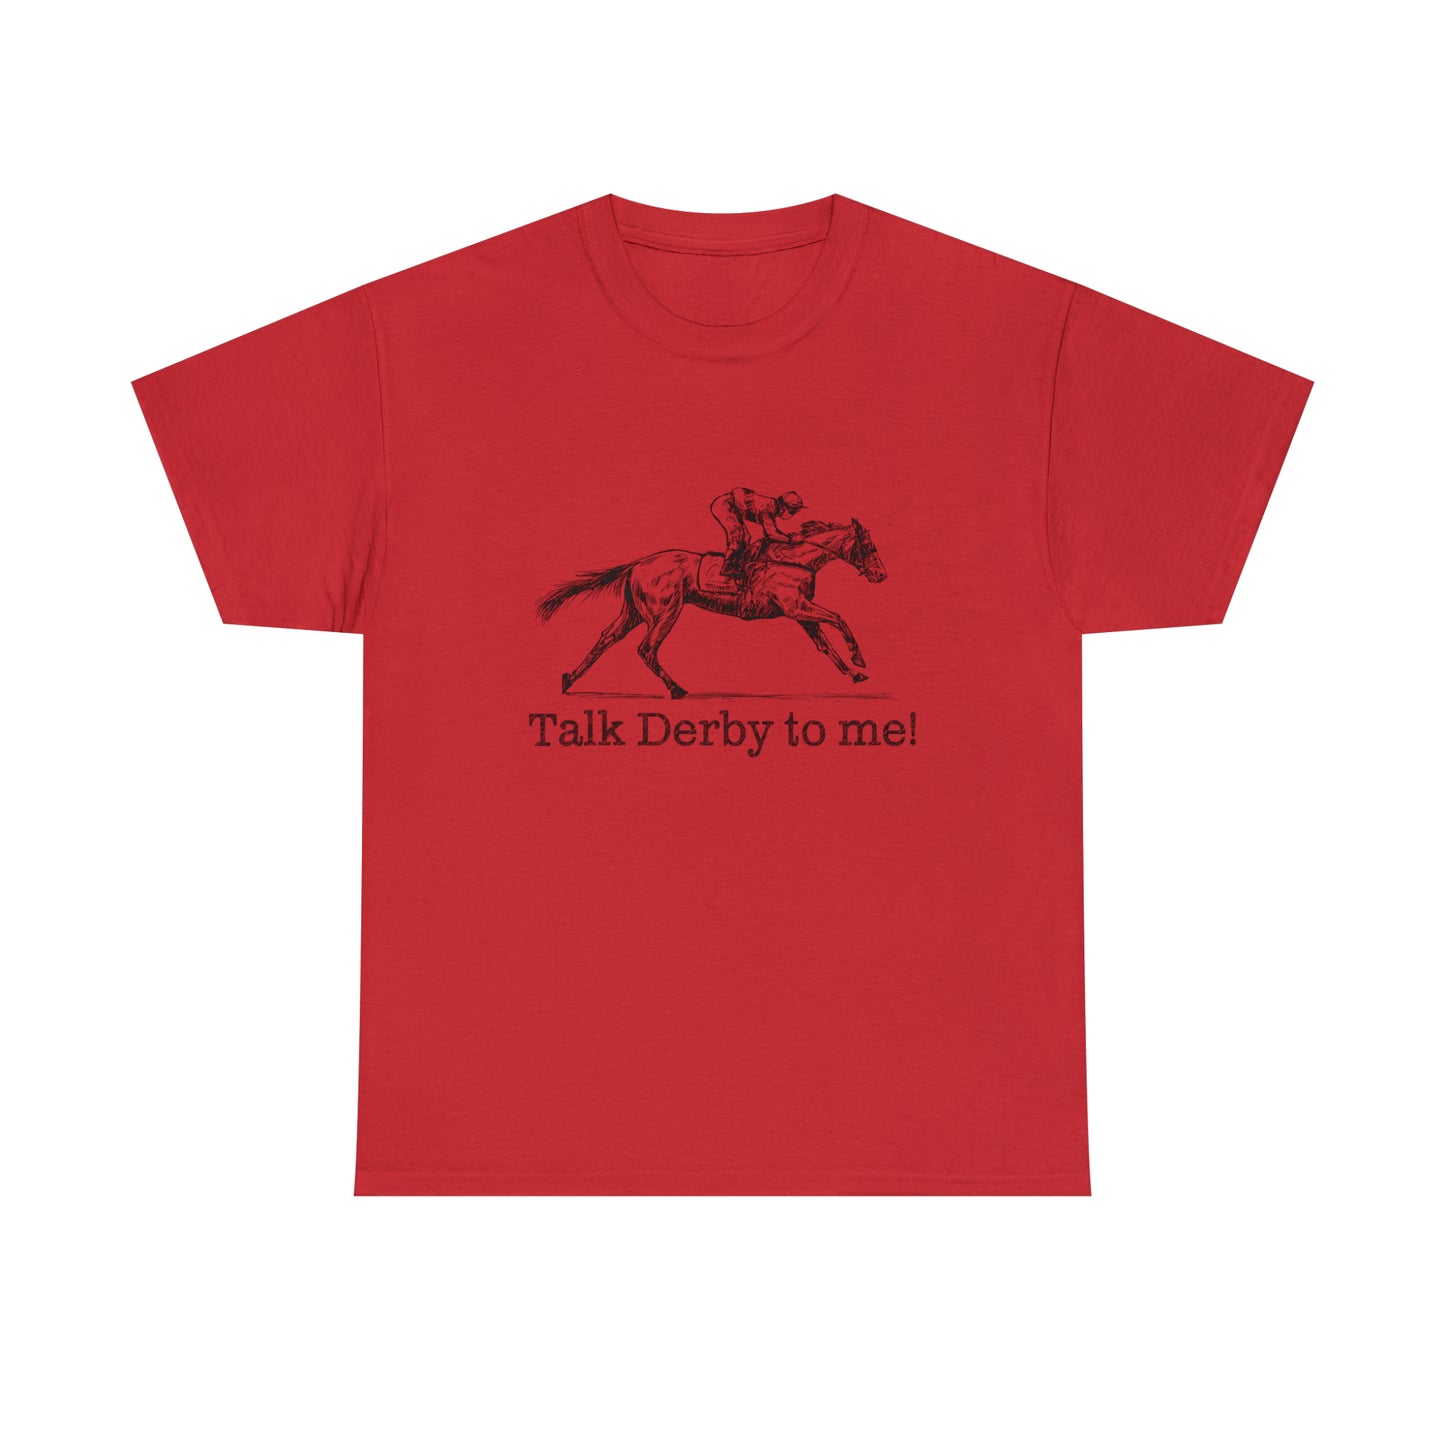 Derby Day T-Shirt For Talk Derby To Me TShirt For Kentucky Derby Shirt For Horse Racing T Shirt For Jockey Shirt With Racehorse Tee